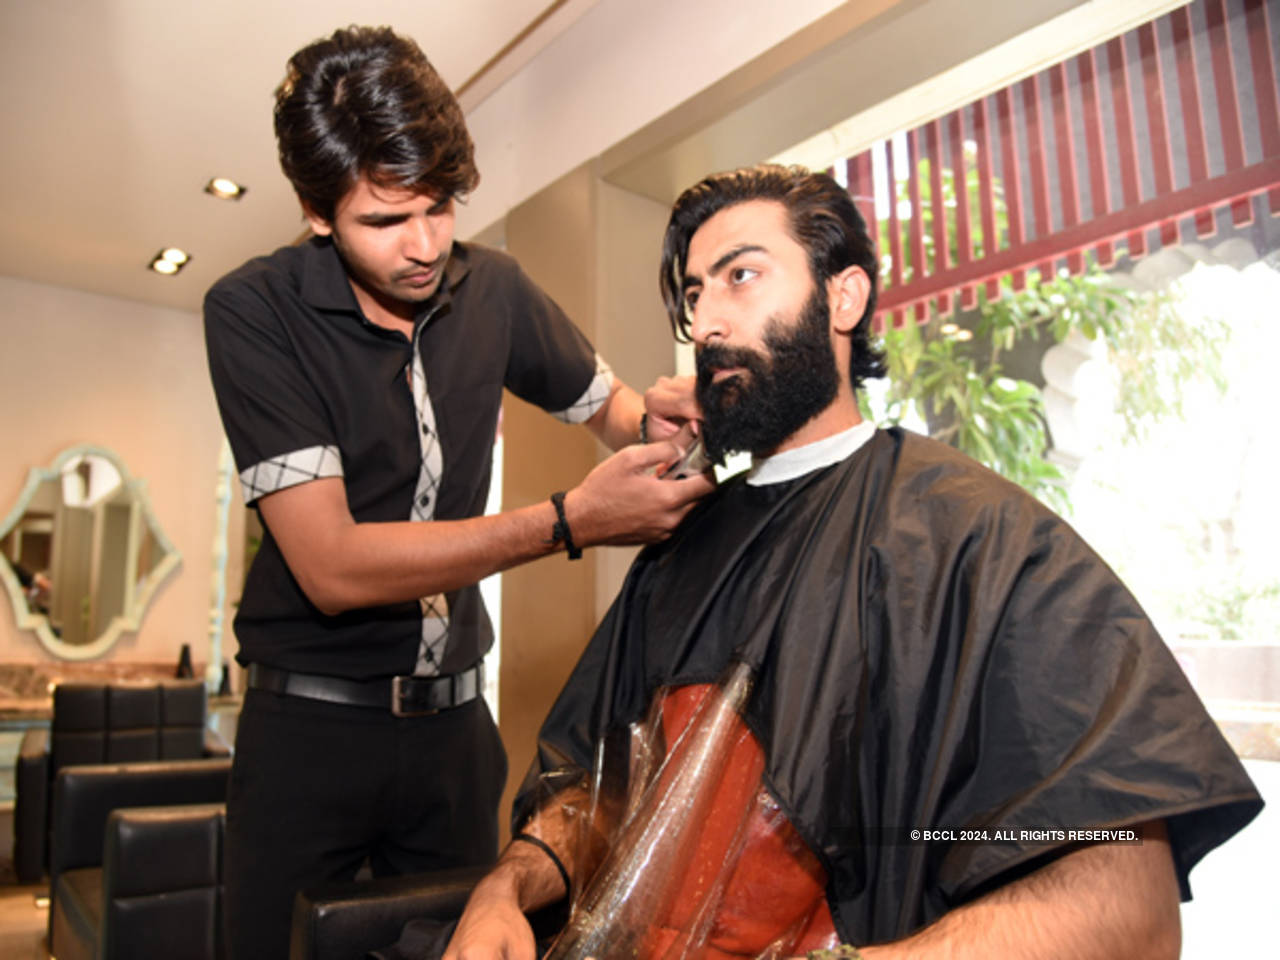 Beard up, say Jaipur men who spend the most on grooming - Times of India